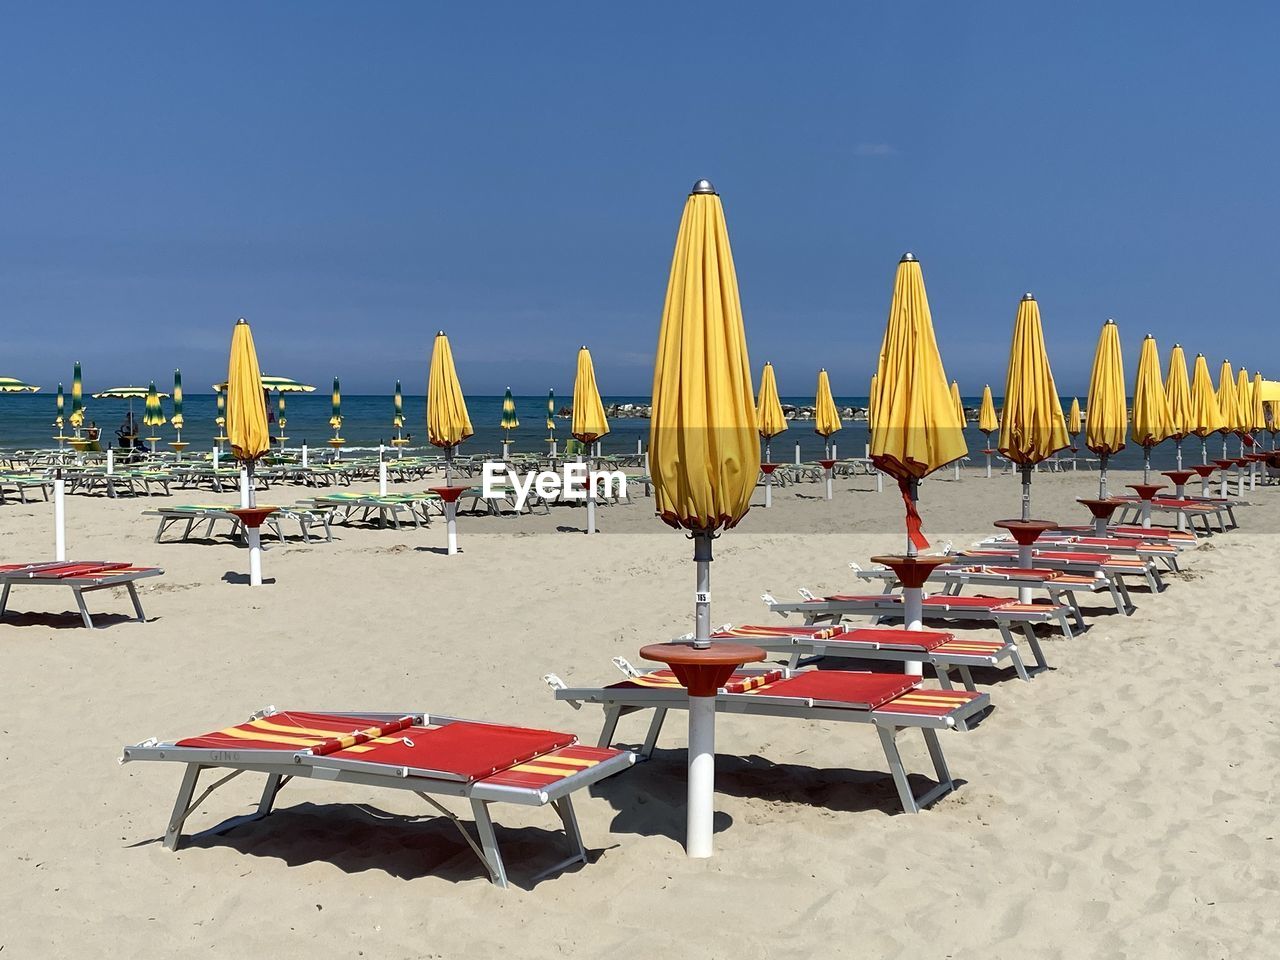 beach, land, sand, chair, sky, sea, nature, water, parasol, summer, seat, umbrella, lounge chair, beach umbrella, in a row, vacation, holiday, deck chair, trip, travel destinations, clear sky, sunshade, sunlight, relaxation, sunny, shade, beauty in nature, scenics - nature, outdoor chair, no people, tranquility, travel, day, outdoors, horizon, blue, absence, large group of objects, tranquil scene, horizon over water, copy space, idyllic, architecture, table, group of objects, tourism, arrangement, furniture